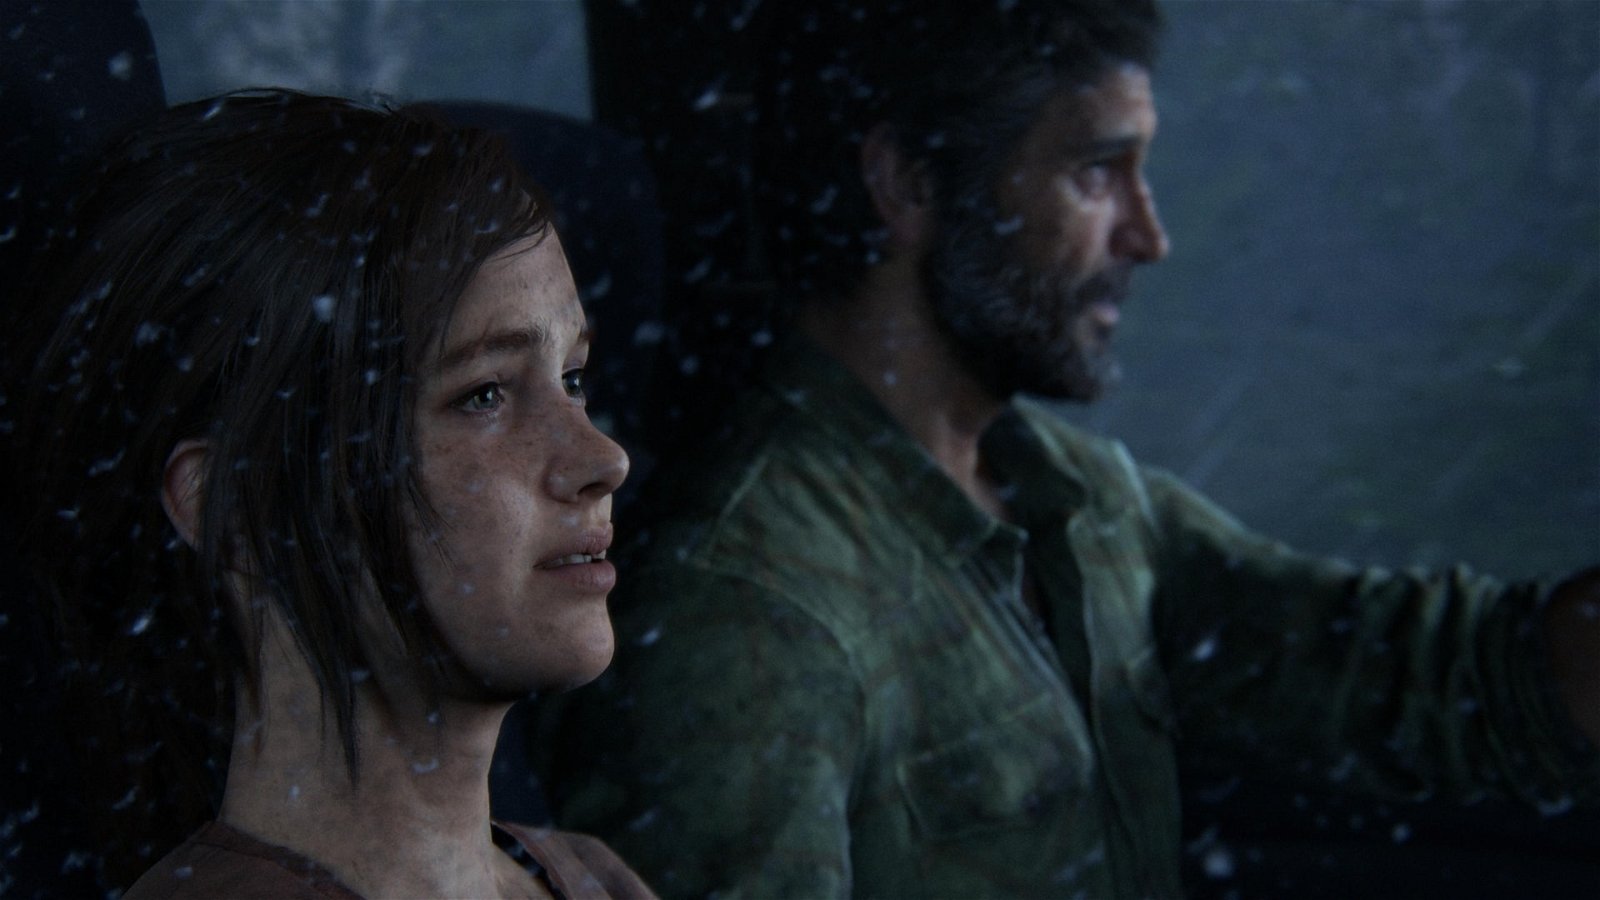 This is what The Last of Us Online looked like: image of Naughty